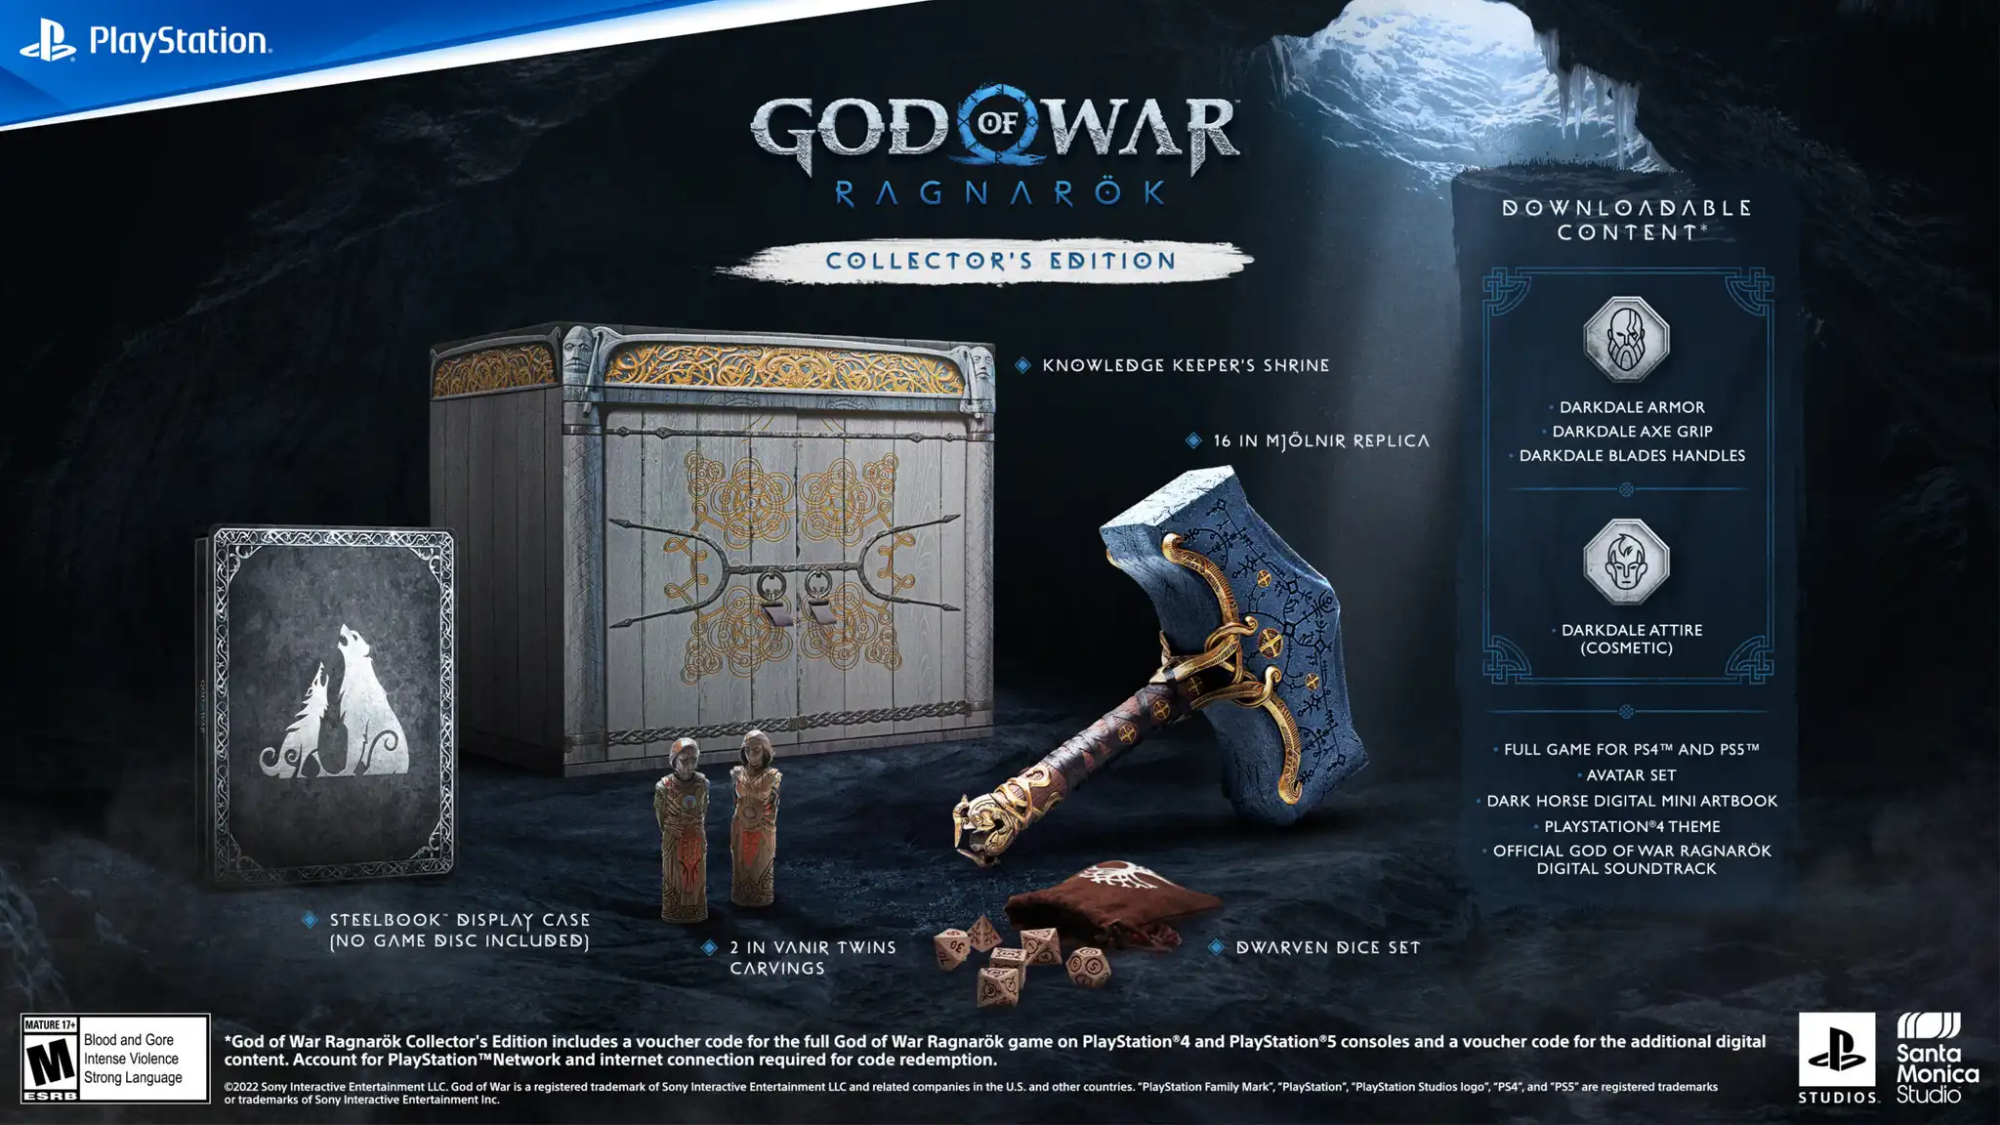 a preview of the bonuses included with "god of war ragnarok" collector's edition